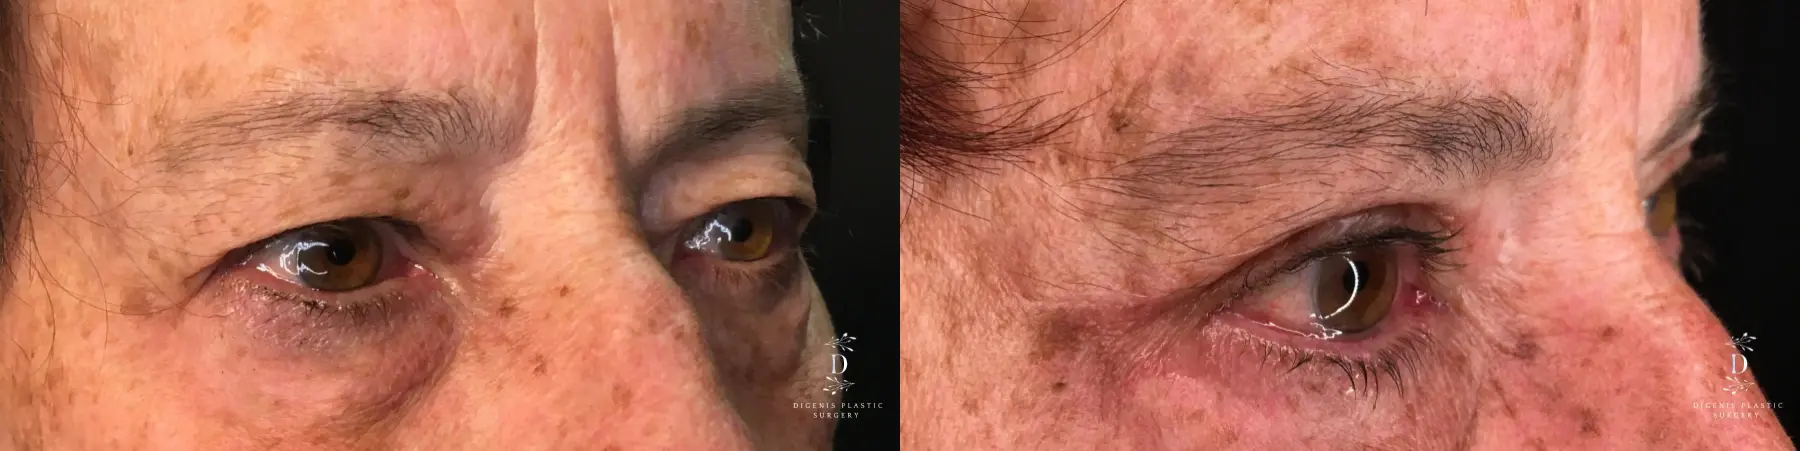 Eyelid Surgery: Patient 26 - Before and After 2